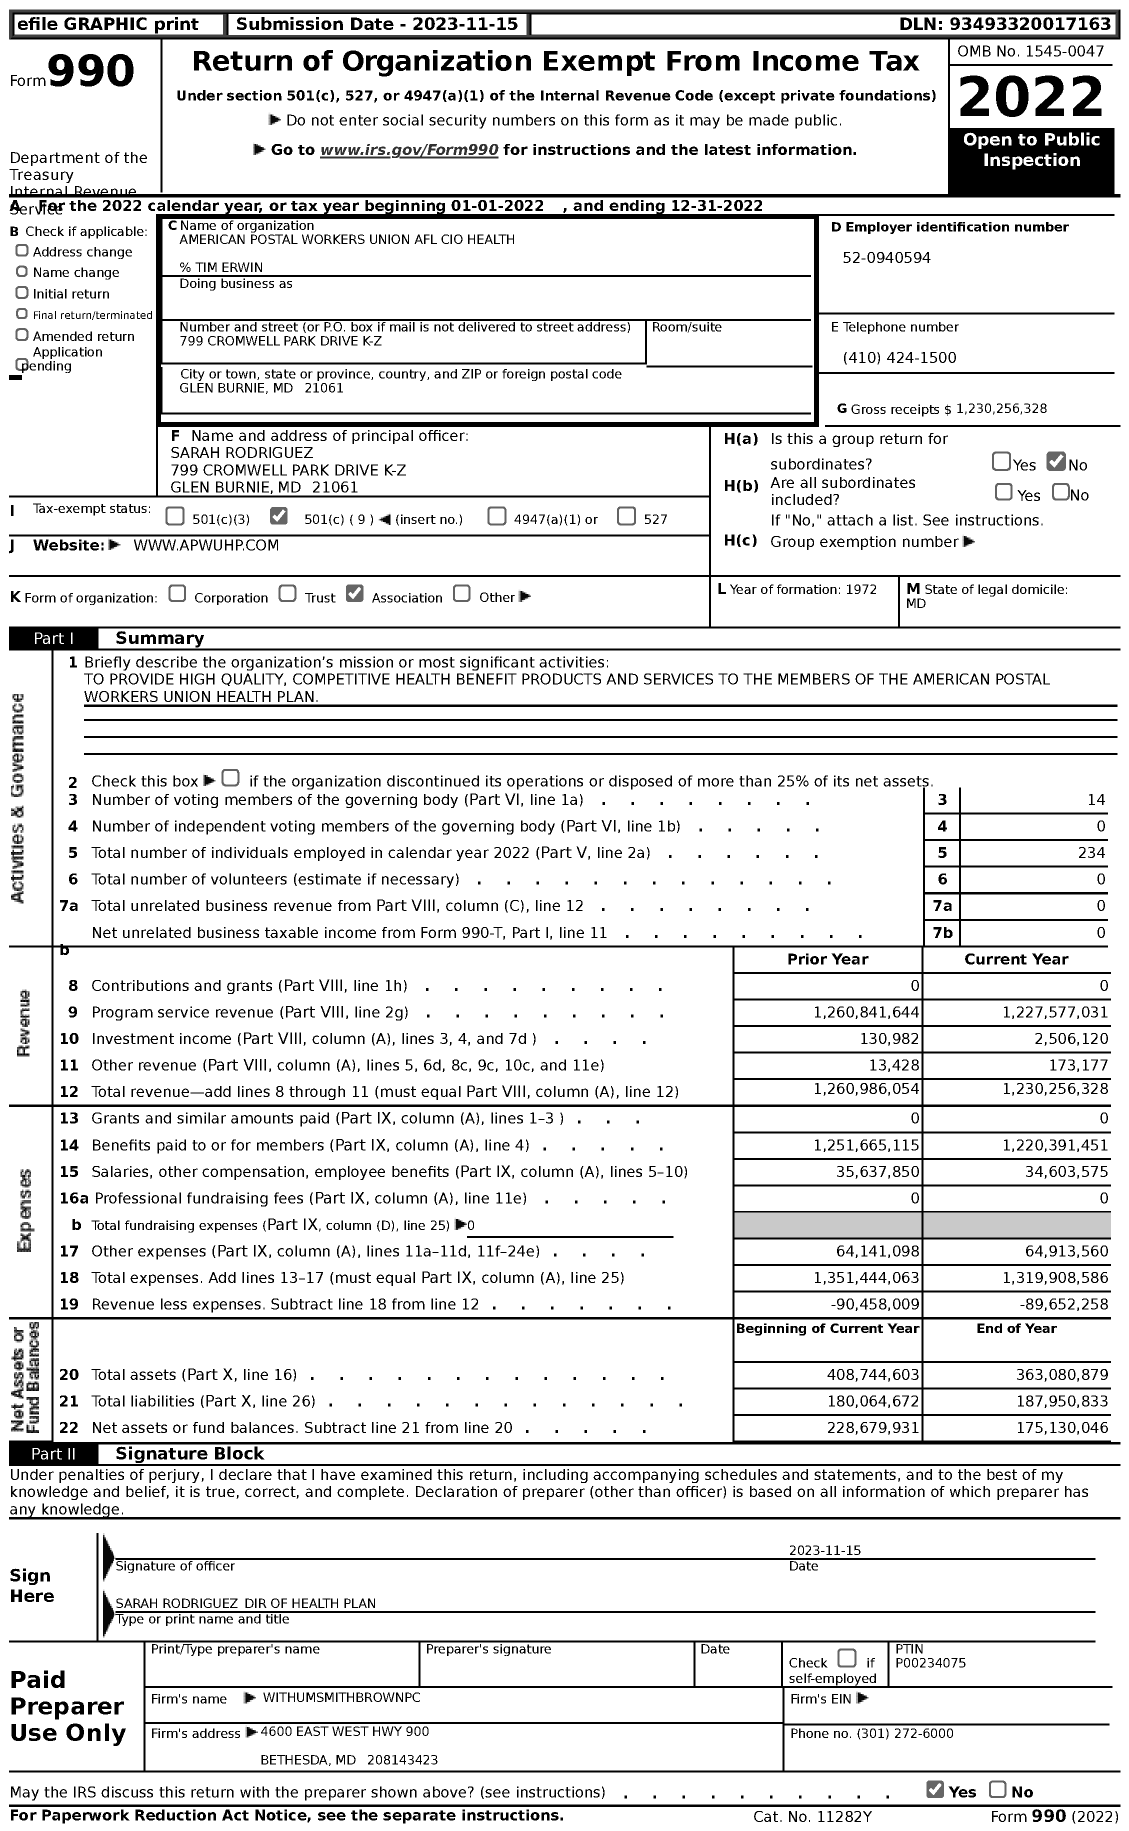 Image of first page of 2022 Form 990 for American Postal Workers Union Health Plan (APWU)